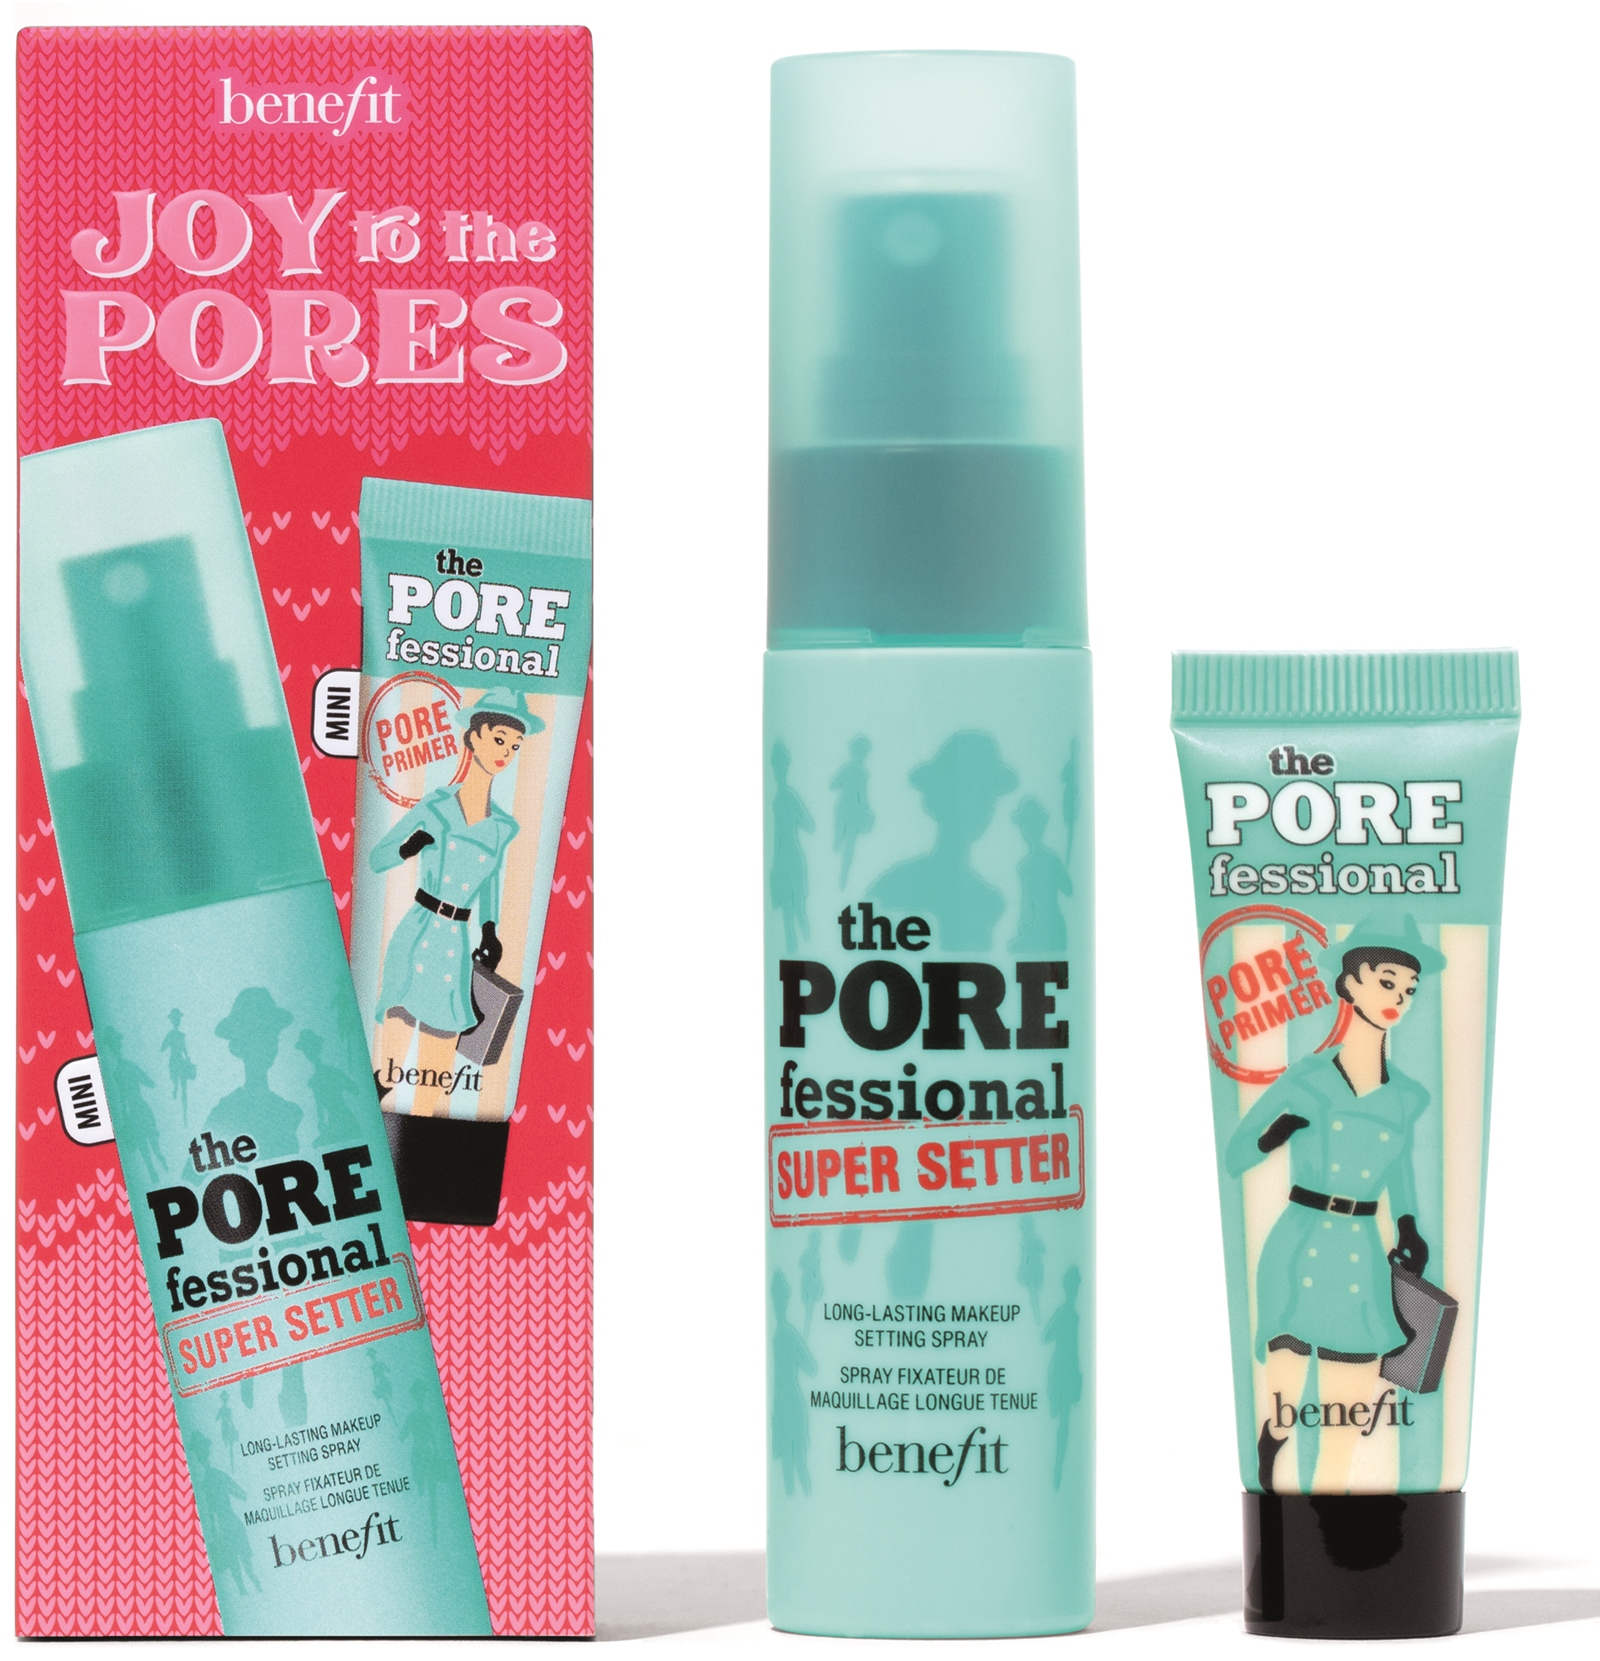 Give the Gift of Benefit Cosmetics this Holiday Season!